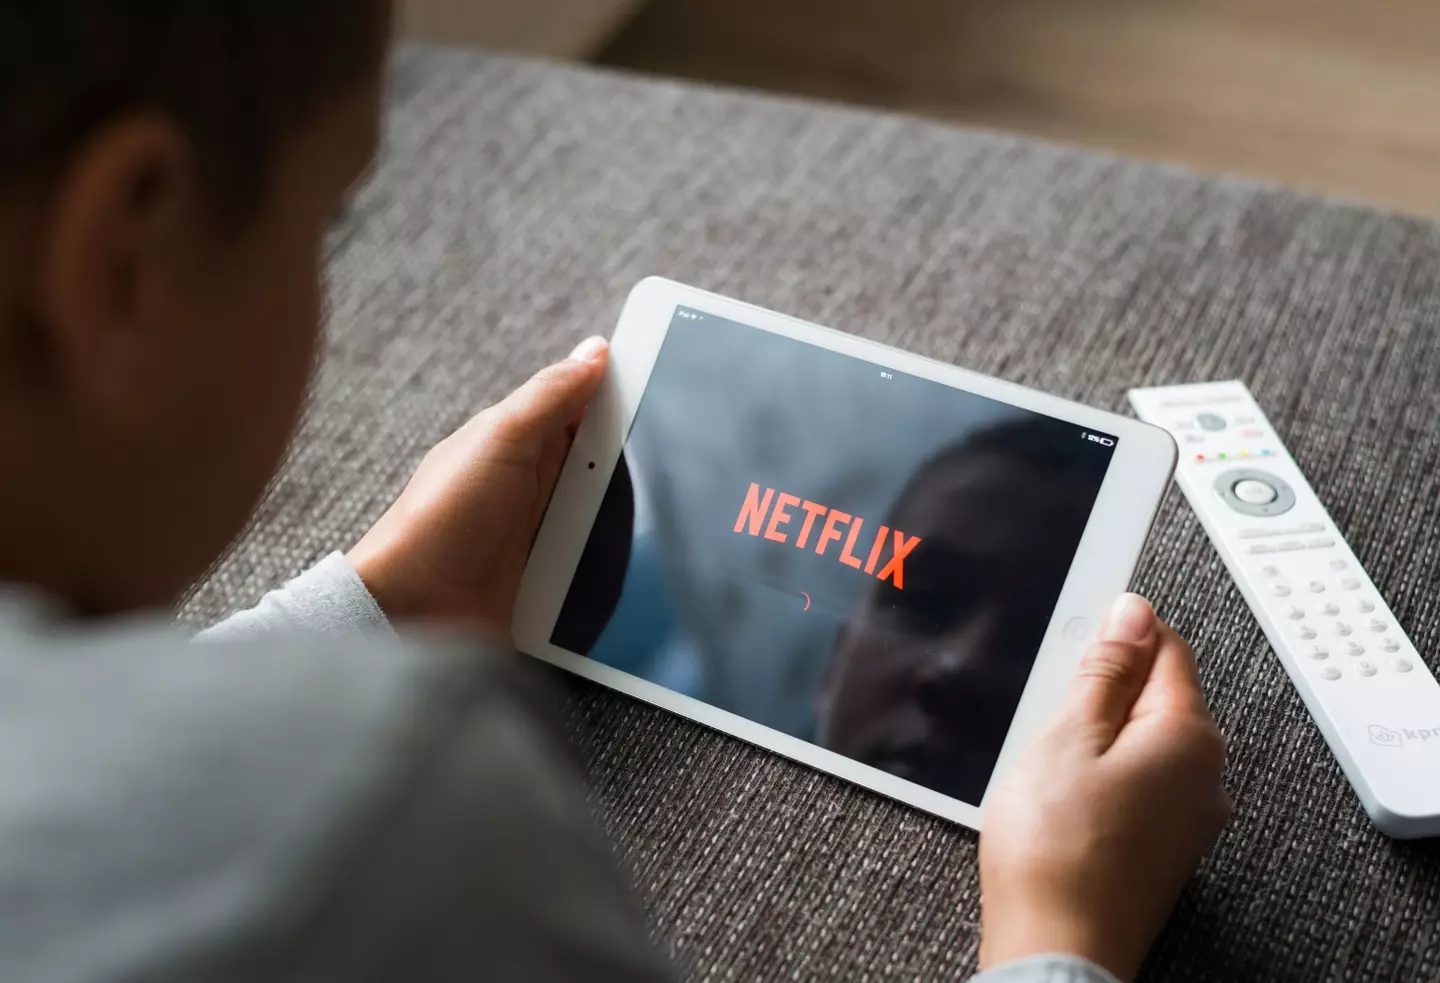 Would you pay less for Netflix to watch adverts?